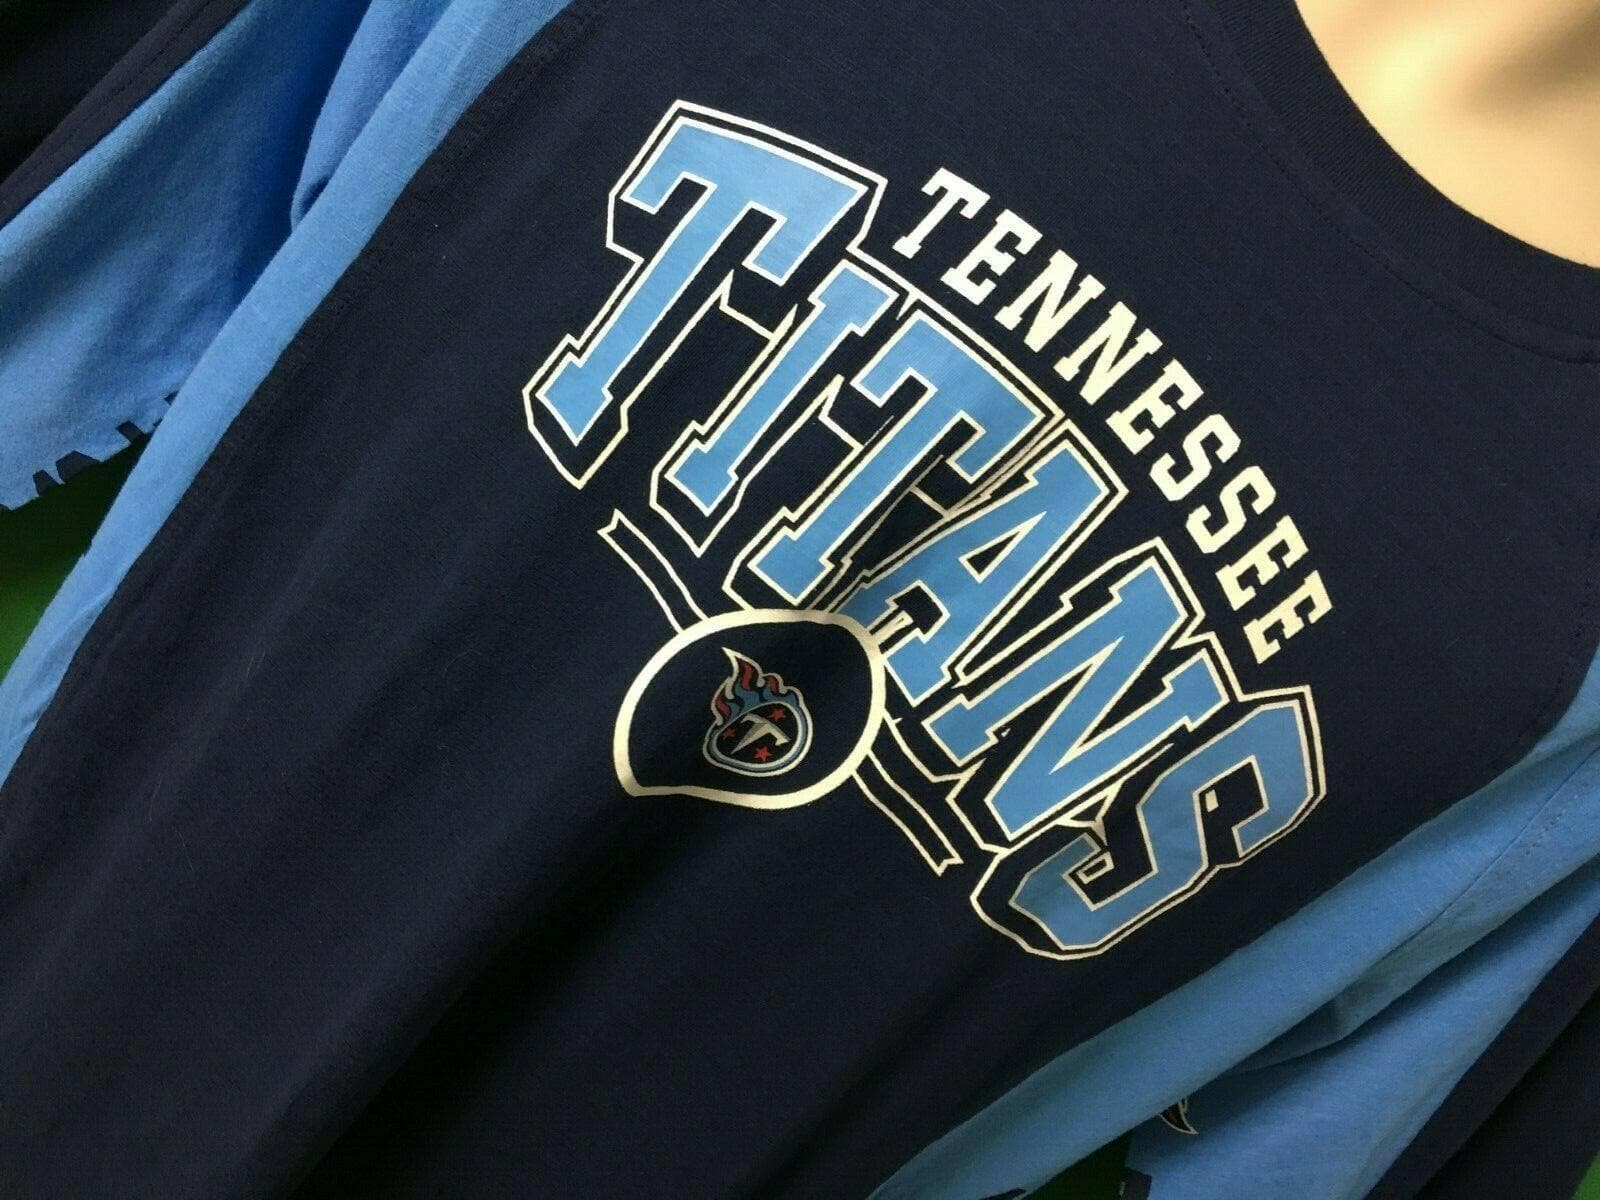 NFL Tennessee Titans Hands High L/S T-Shirt Men's Large NWT